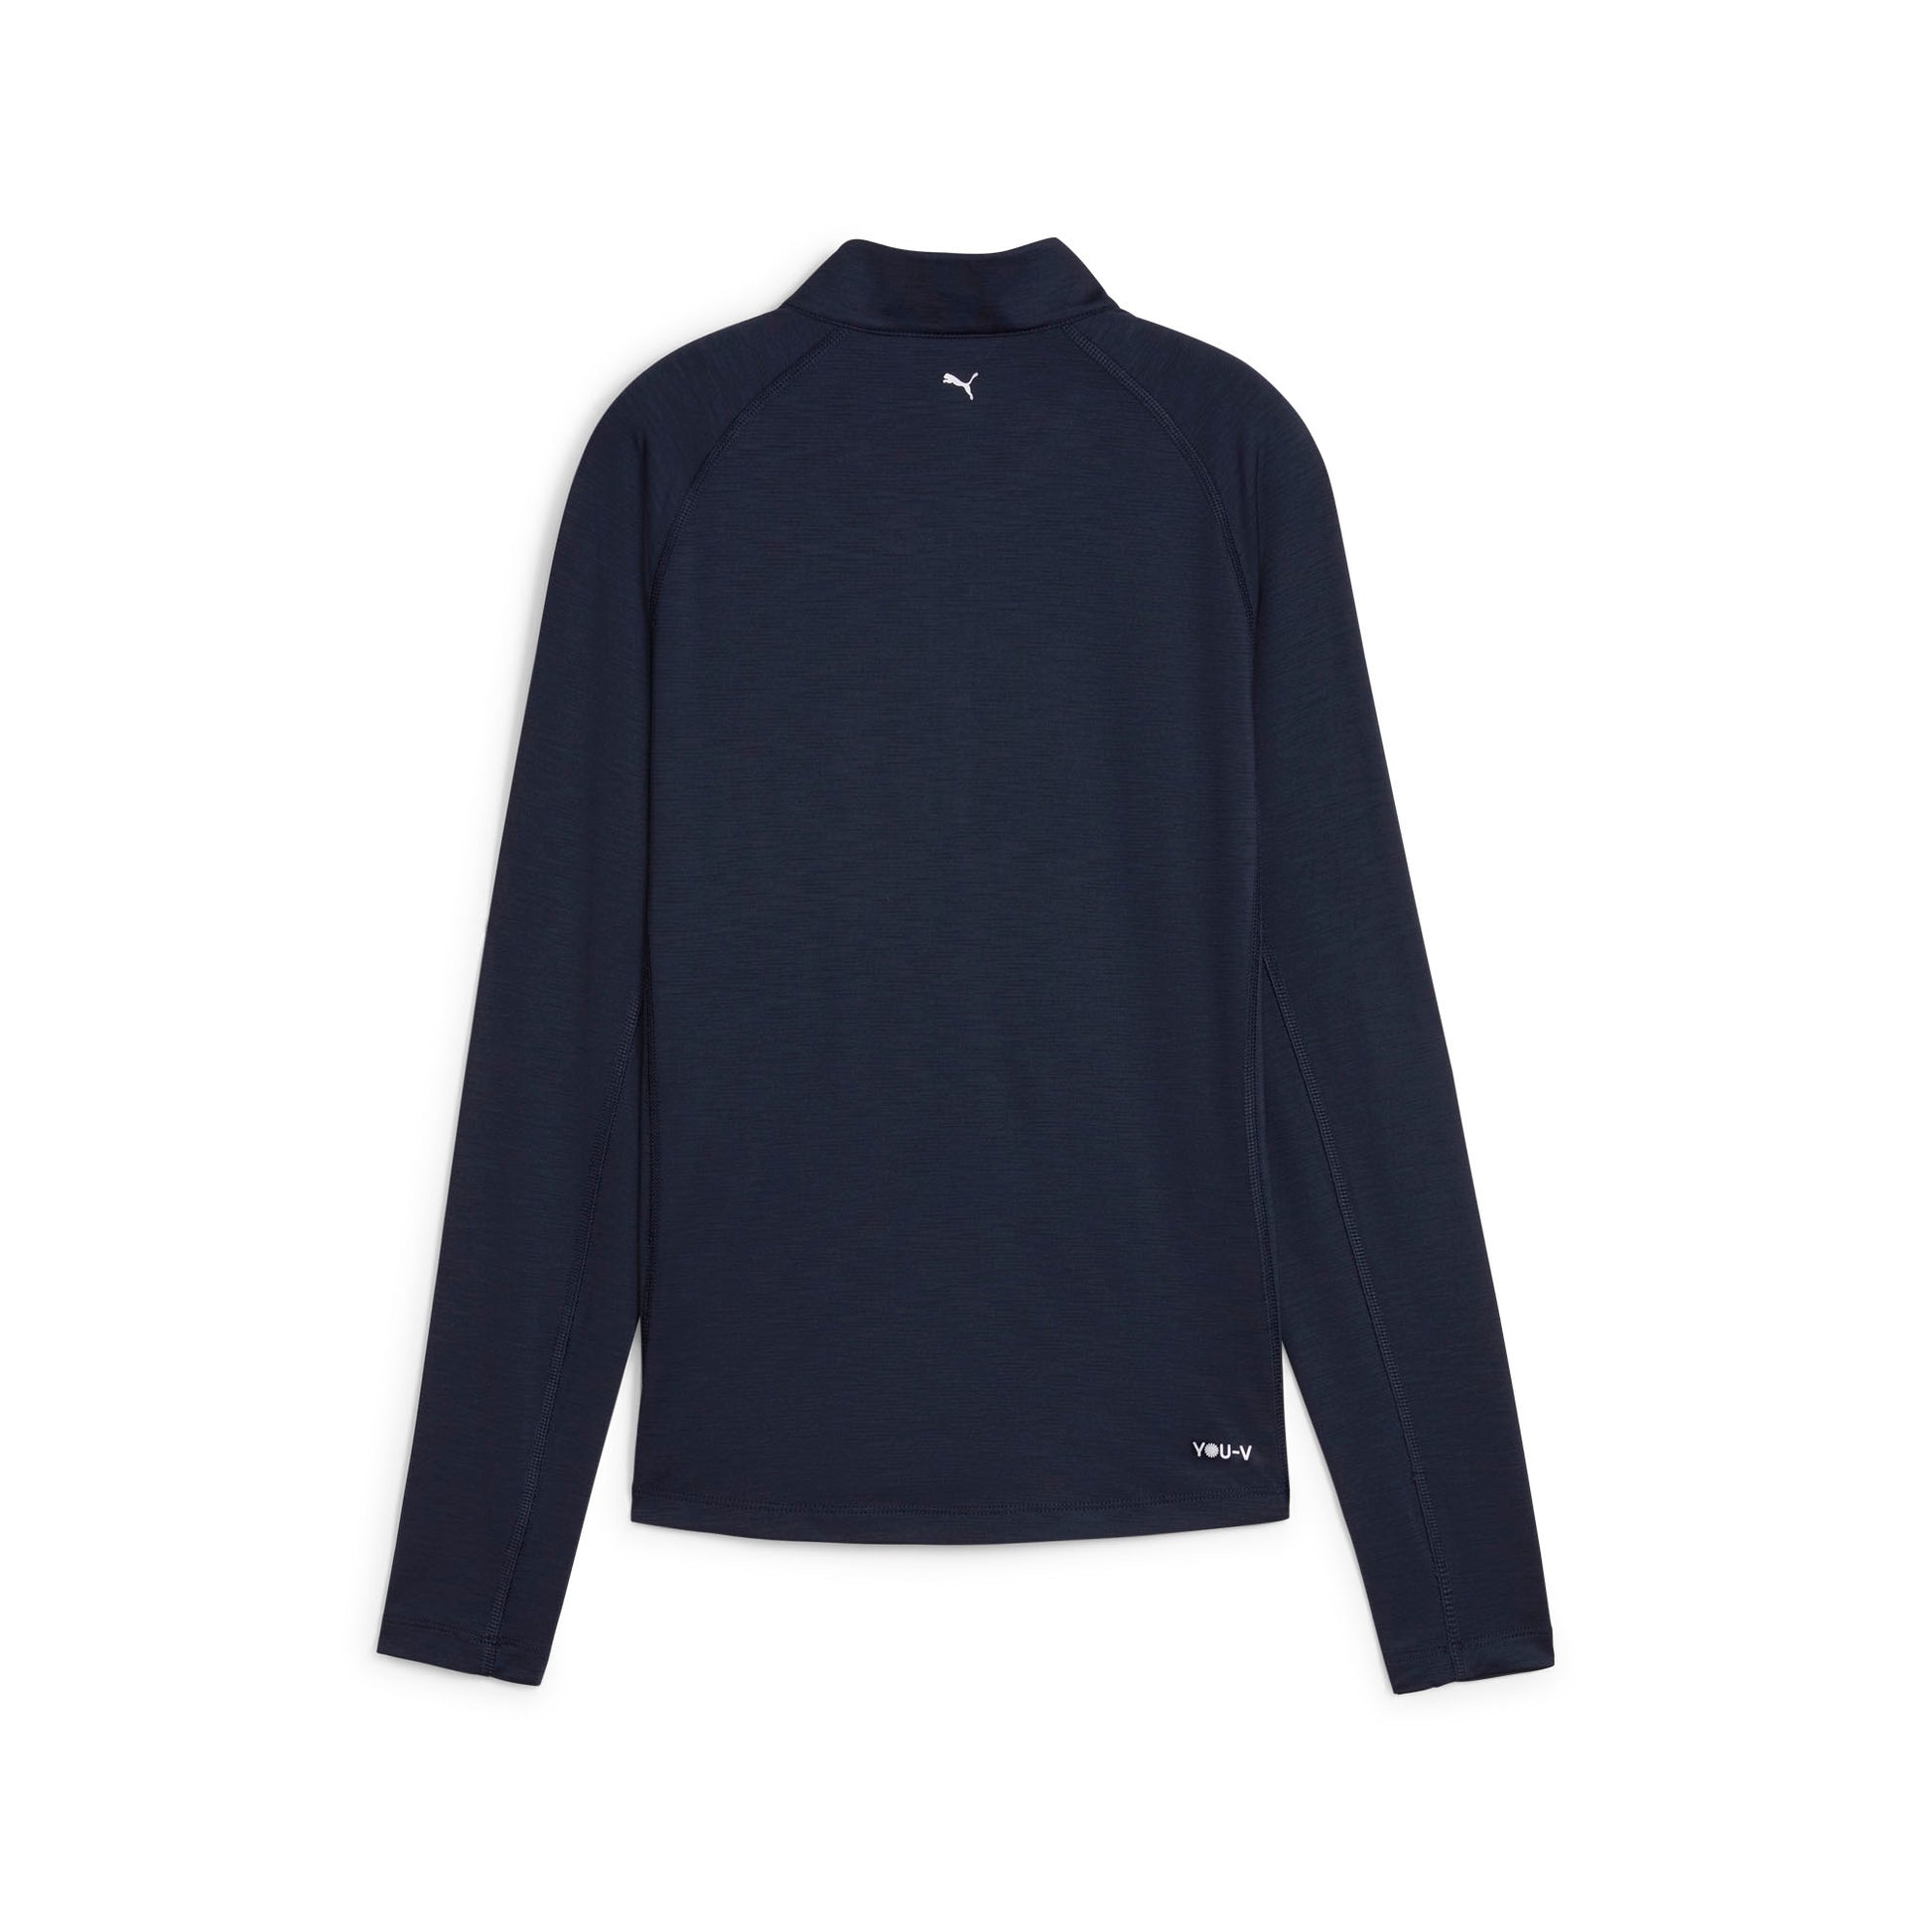 Puma Ladies YOU-V 1/4 Zip Top in Deep Navy with UPF 50+